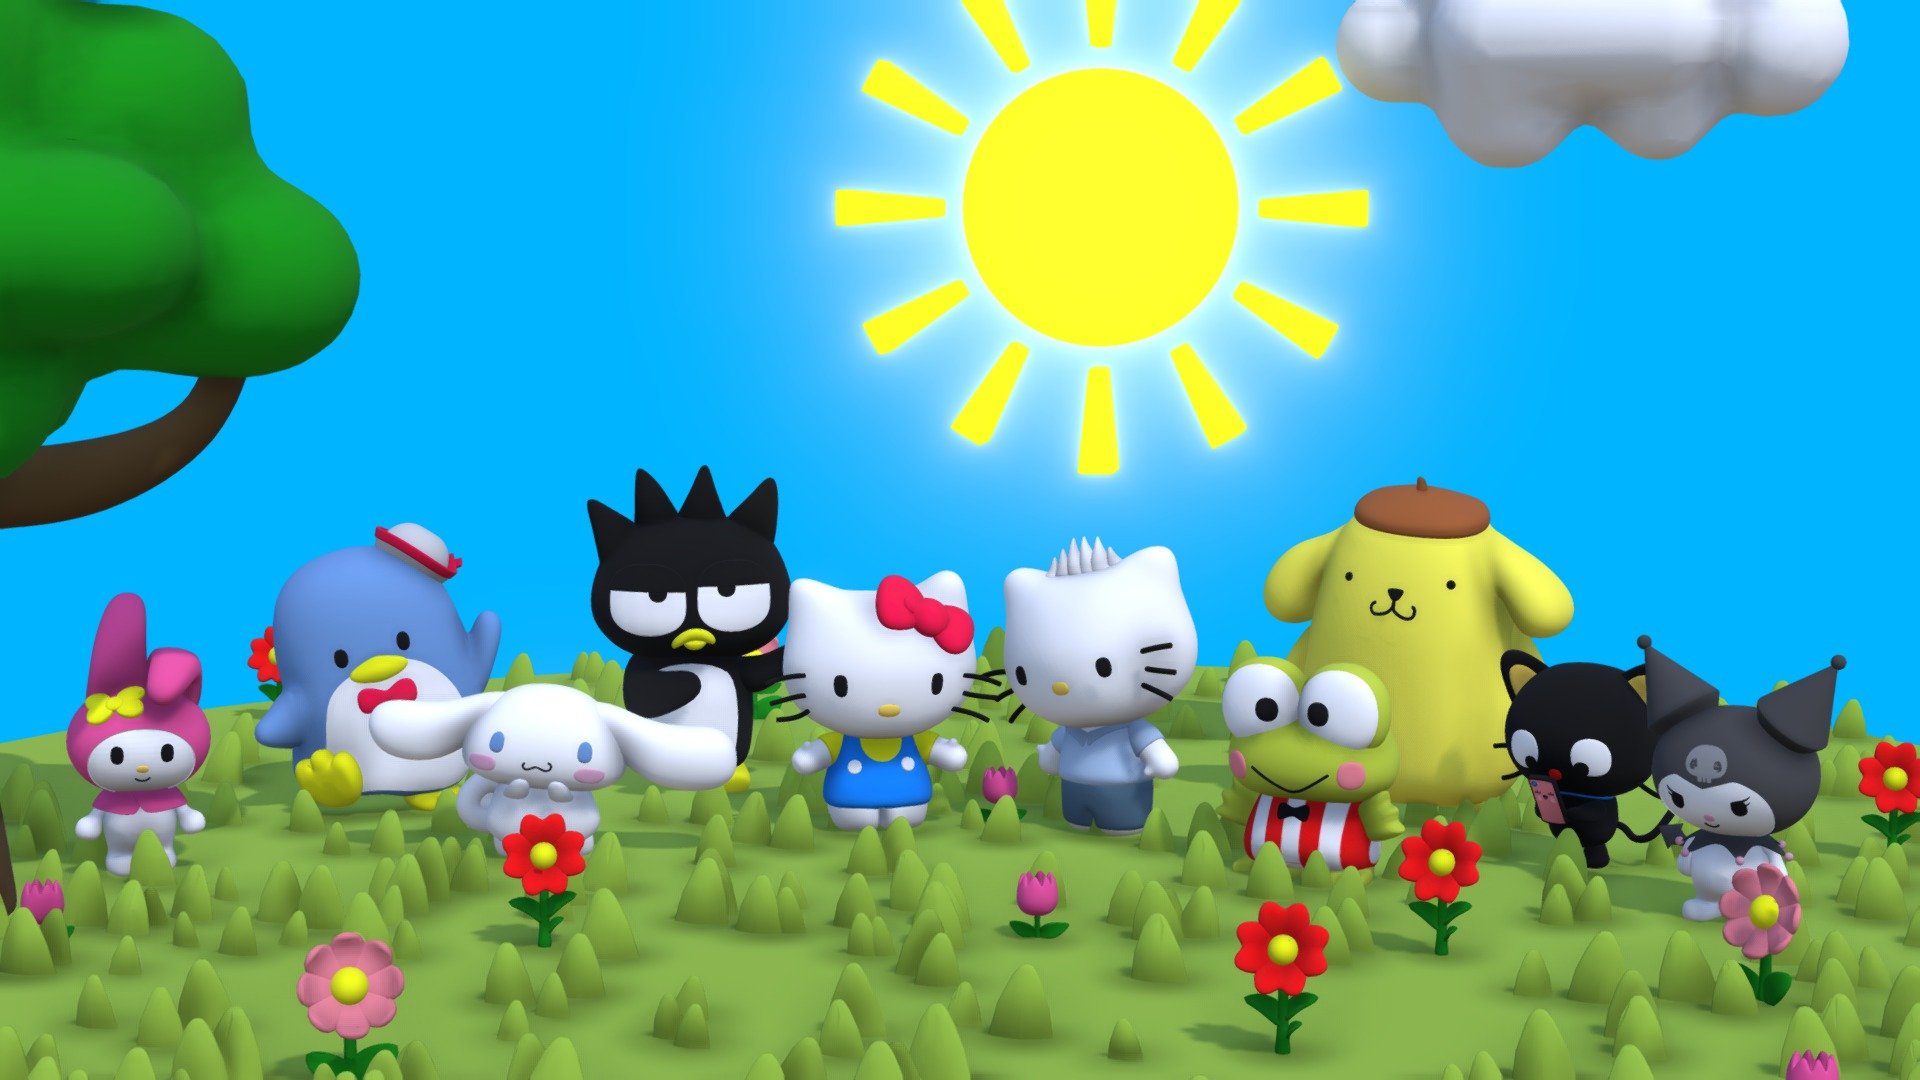 A collection of the main group of Hello Kitty and her friends.
The characters include




My Melody

Tuxedo Sam

Cinnamoroll

Badtz Maru

Hello Kitty

Keroppi

Pompompurin

Chococat

Kuromi
 - Hello Kitty and Friends - 3D model by SirSquiggles 3d model